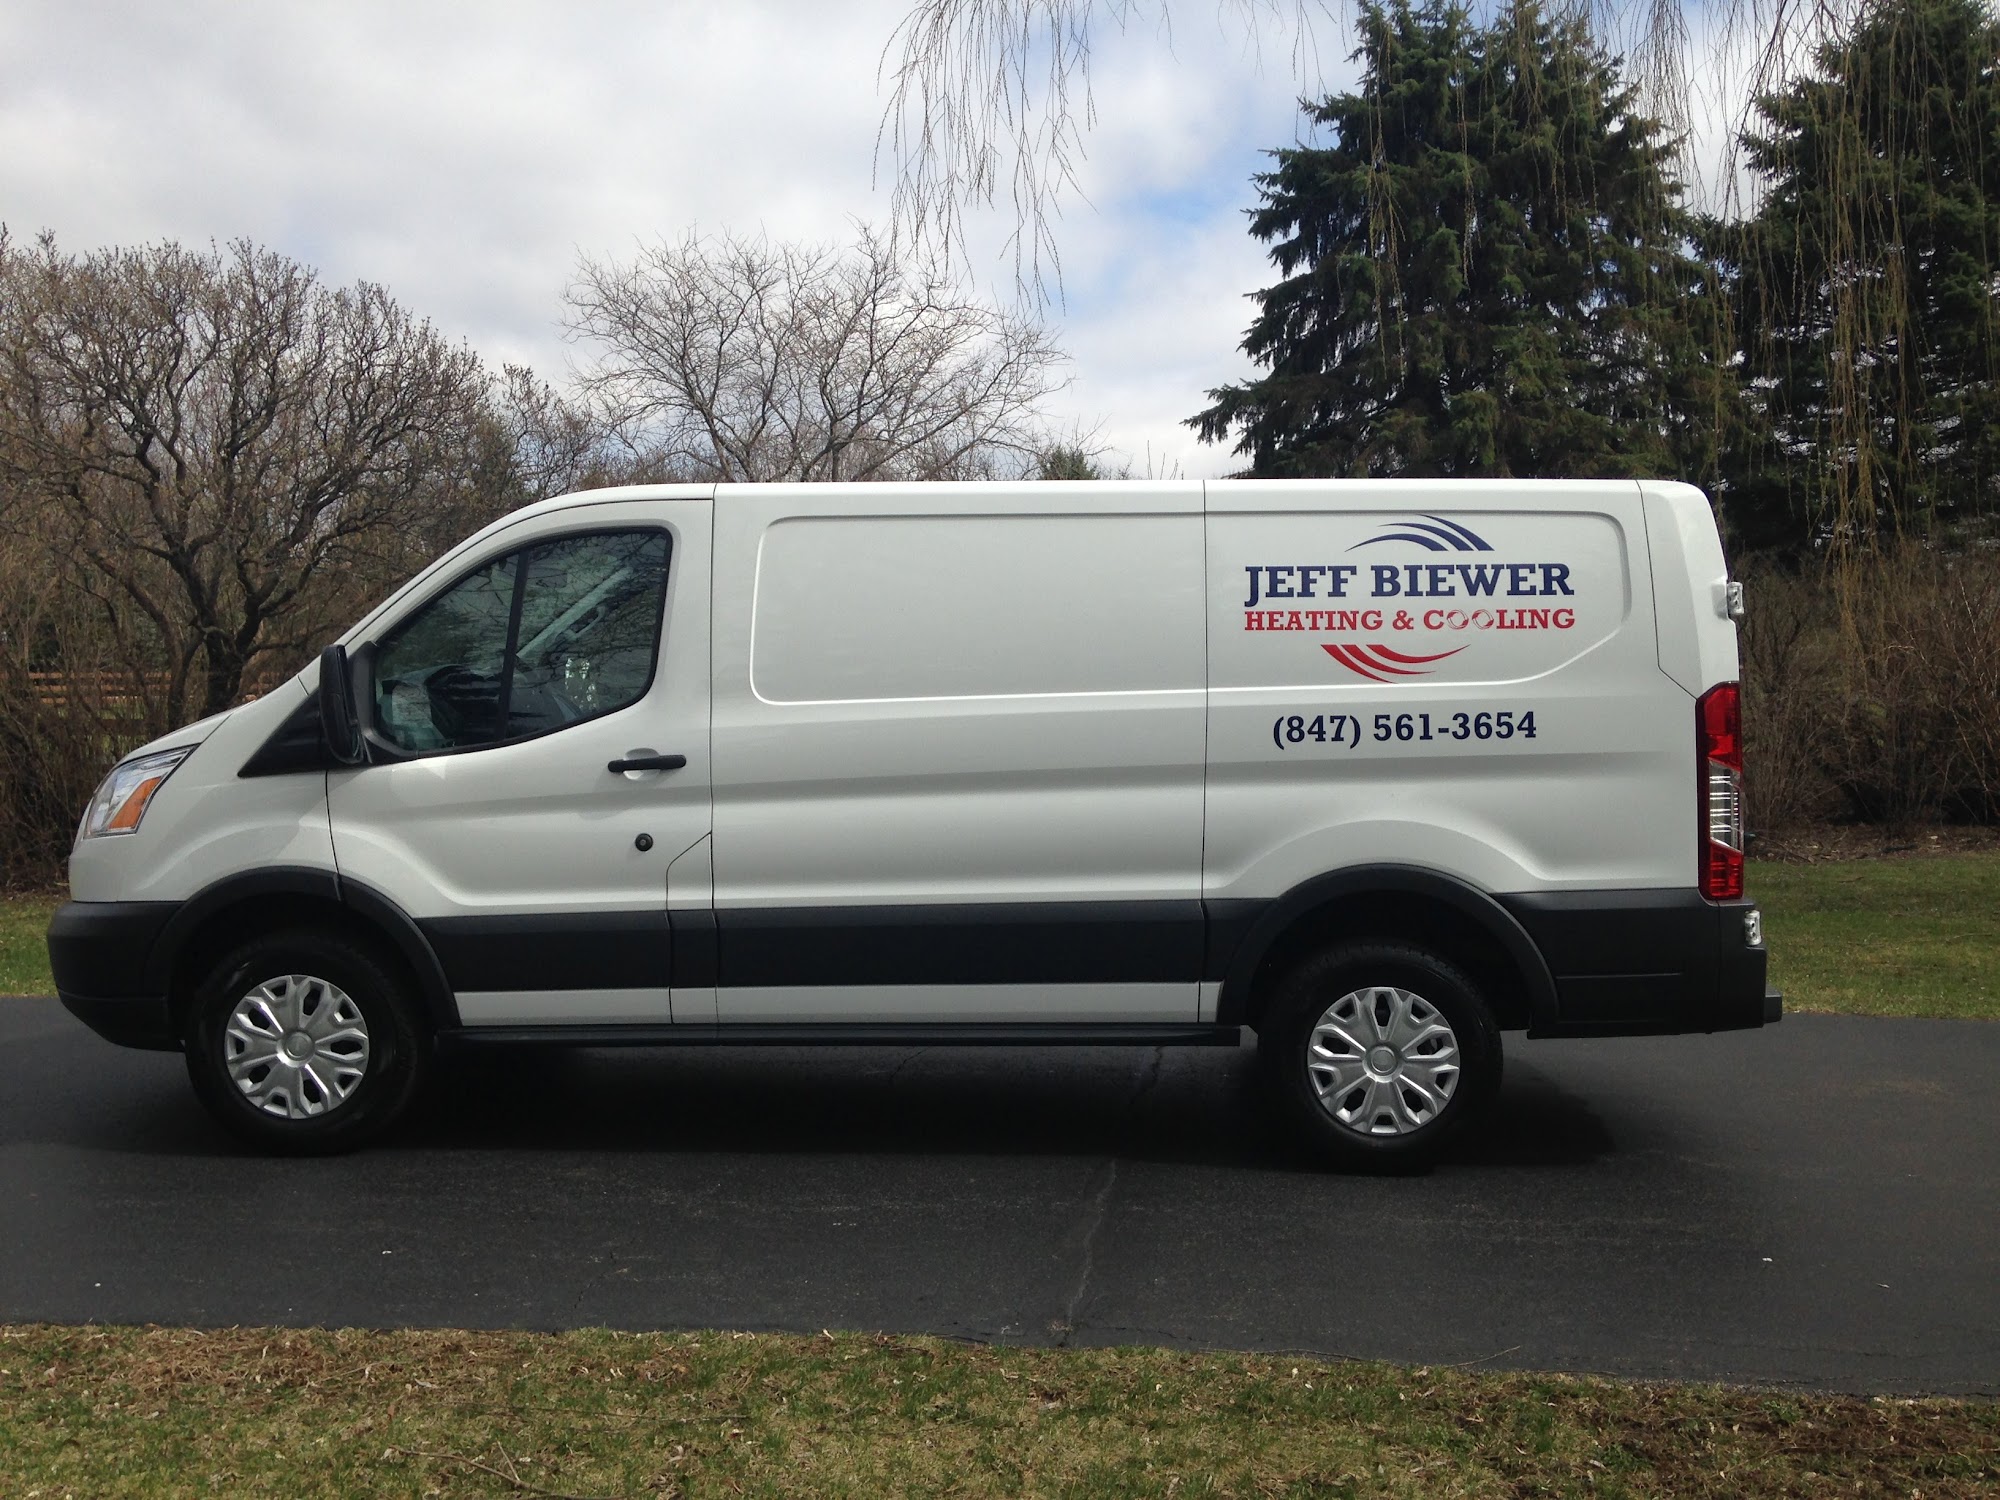 Jeff Biewer Heating and Cooling Inc.